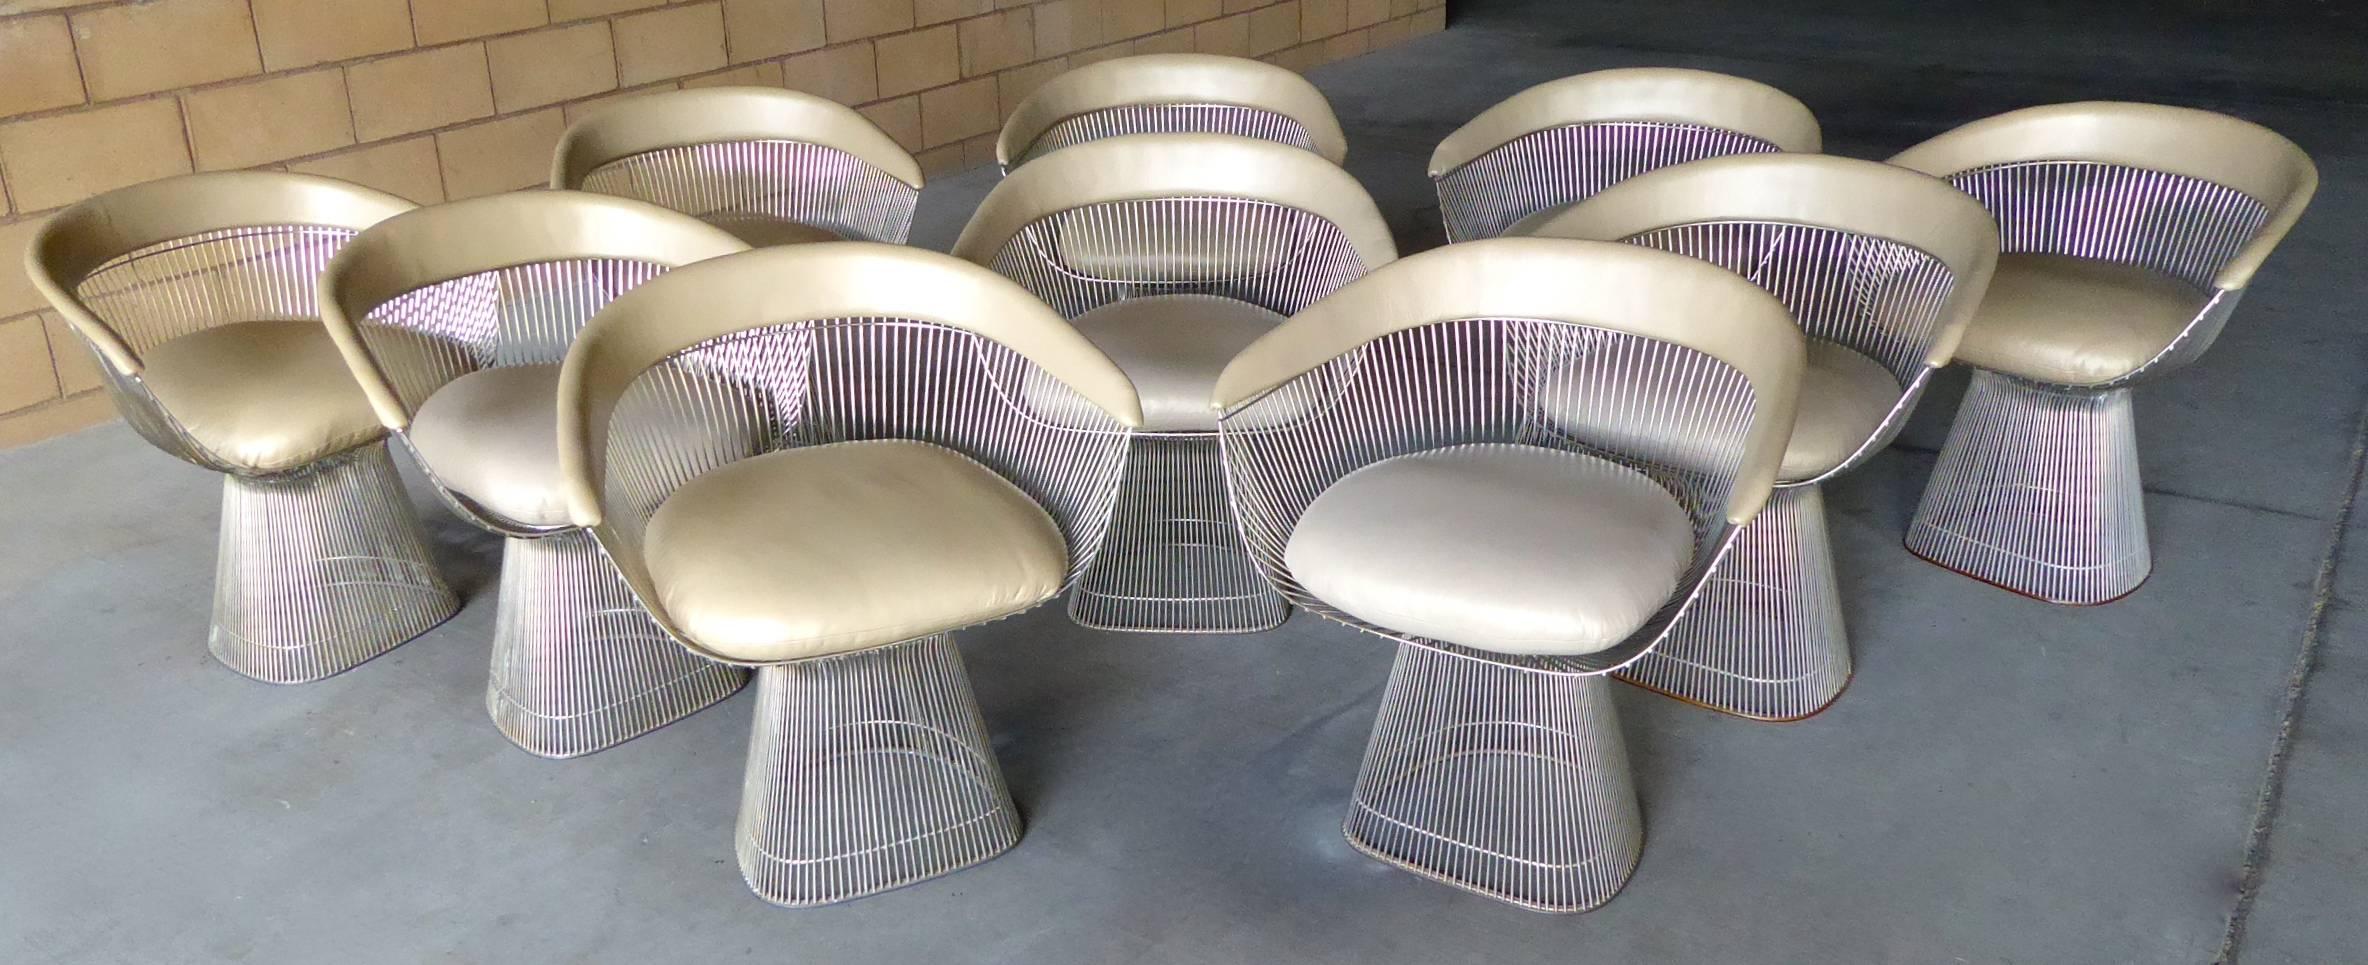 Mid-Century Modern Superb Set of Ten Nickel-Plated Metal Dining Chairs by Warren Platner for Knoll